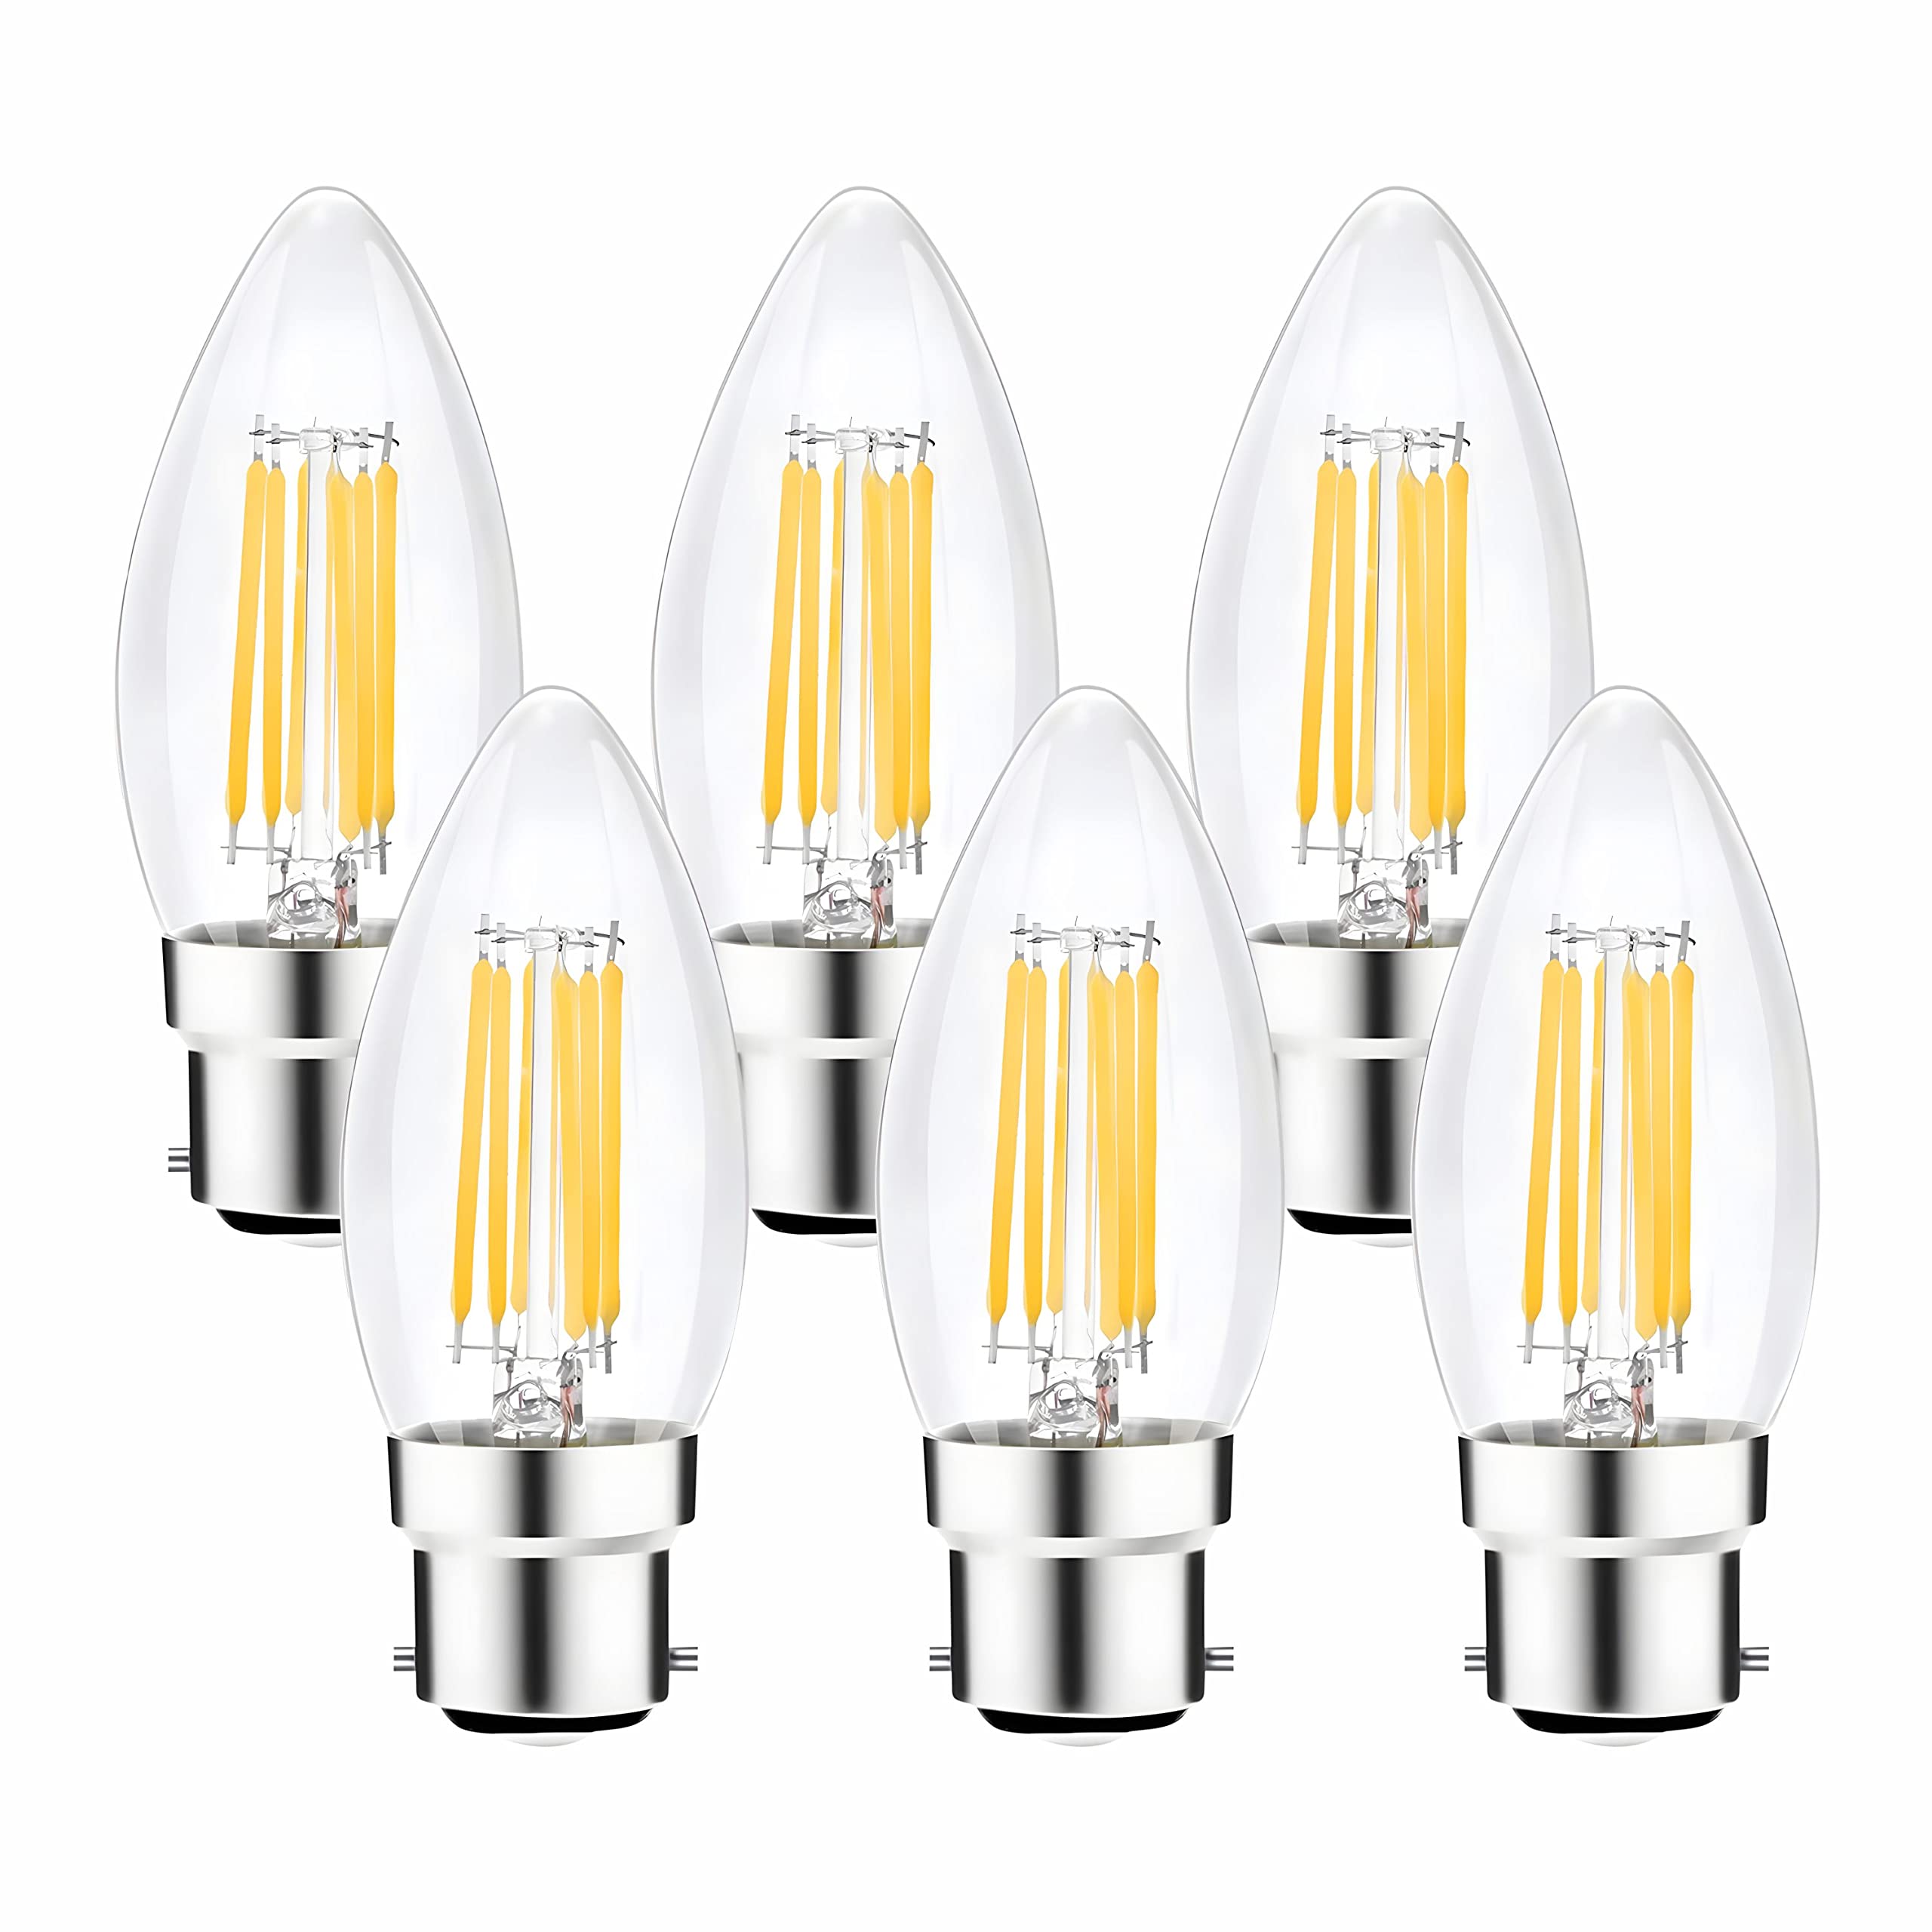 AcornSolution B22 LED Candle bulbs, 6W Small Edison Screw Candle Light Bulbs , 3000K Warm White , 600 Lumen, Dimmable, Pack of 6